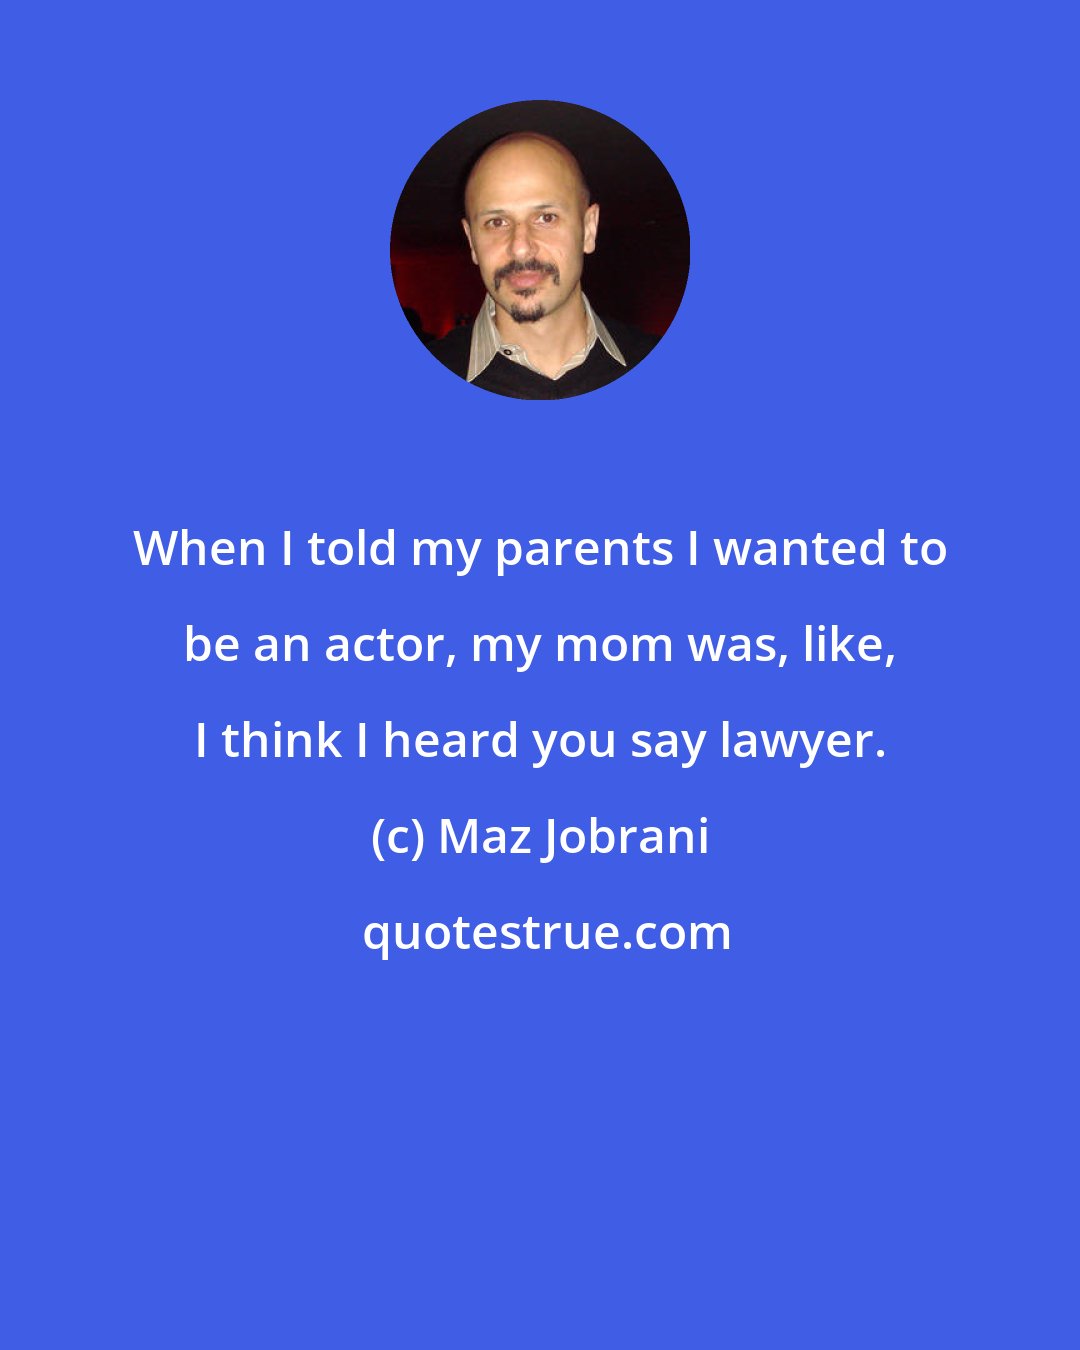 Maz Jobrani: When I told my parents I wanted to be an actor, my mom was, like, I think I heard you say lawyer.